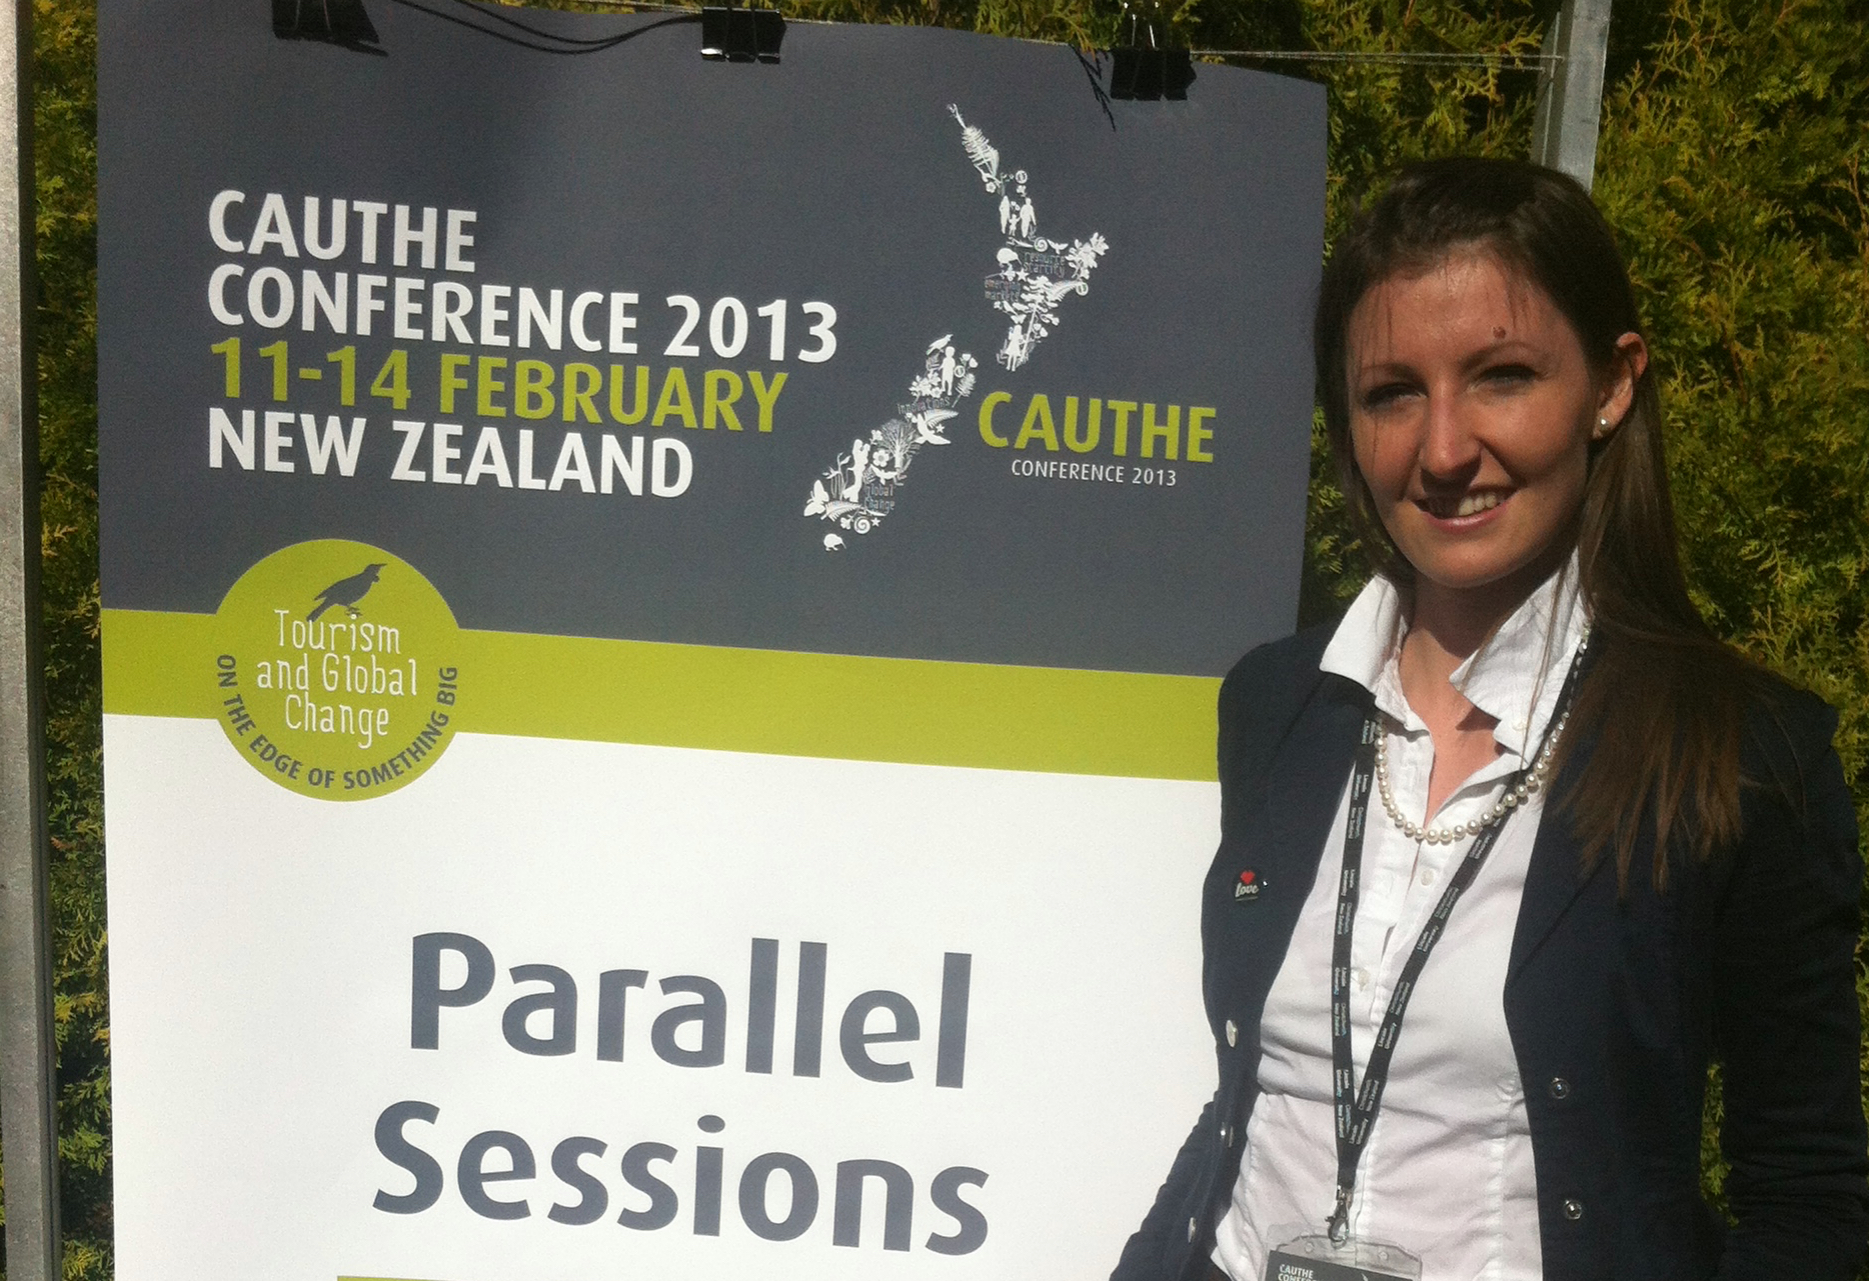 Barbara Neuhofer presents at the CAUTHE Conference 2013